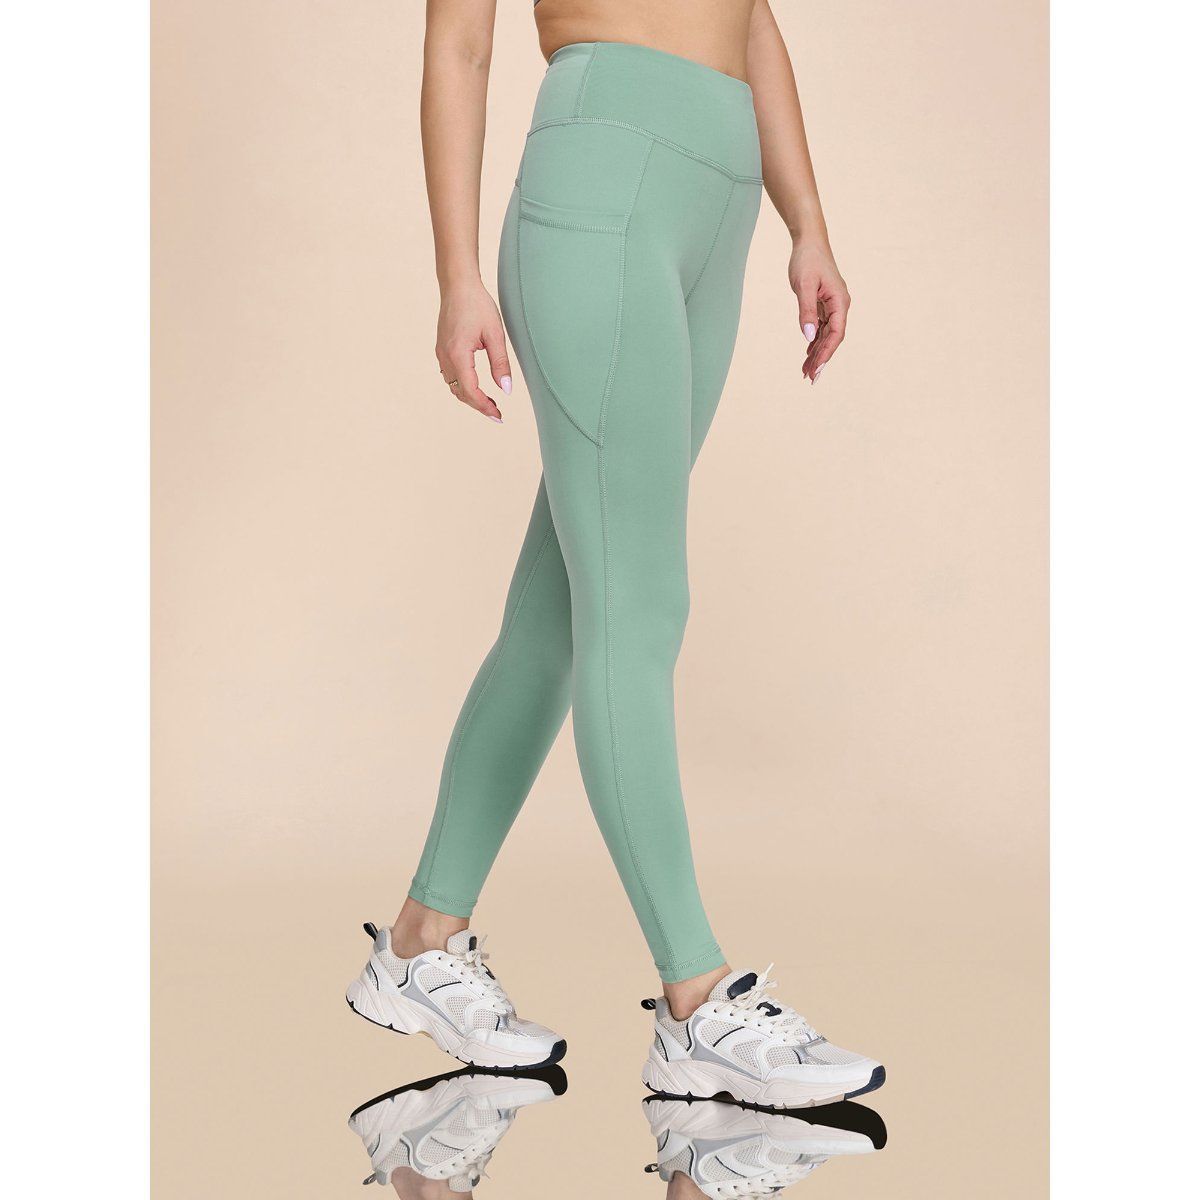 Buy Women High Waisted Stretchable & Sculpting Leggings online